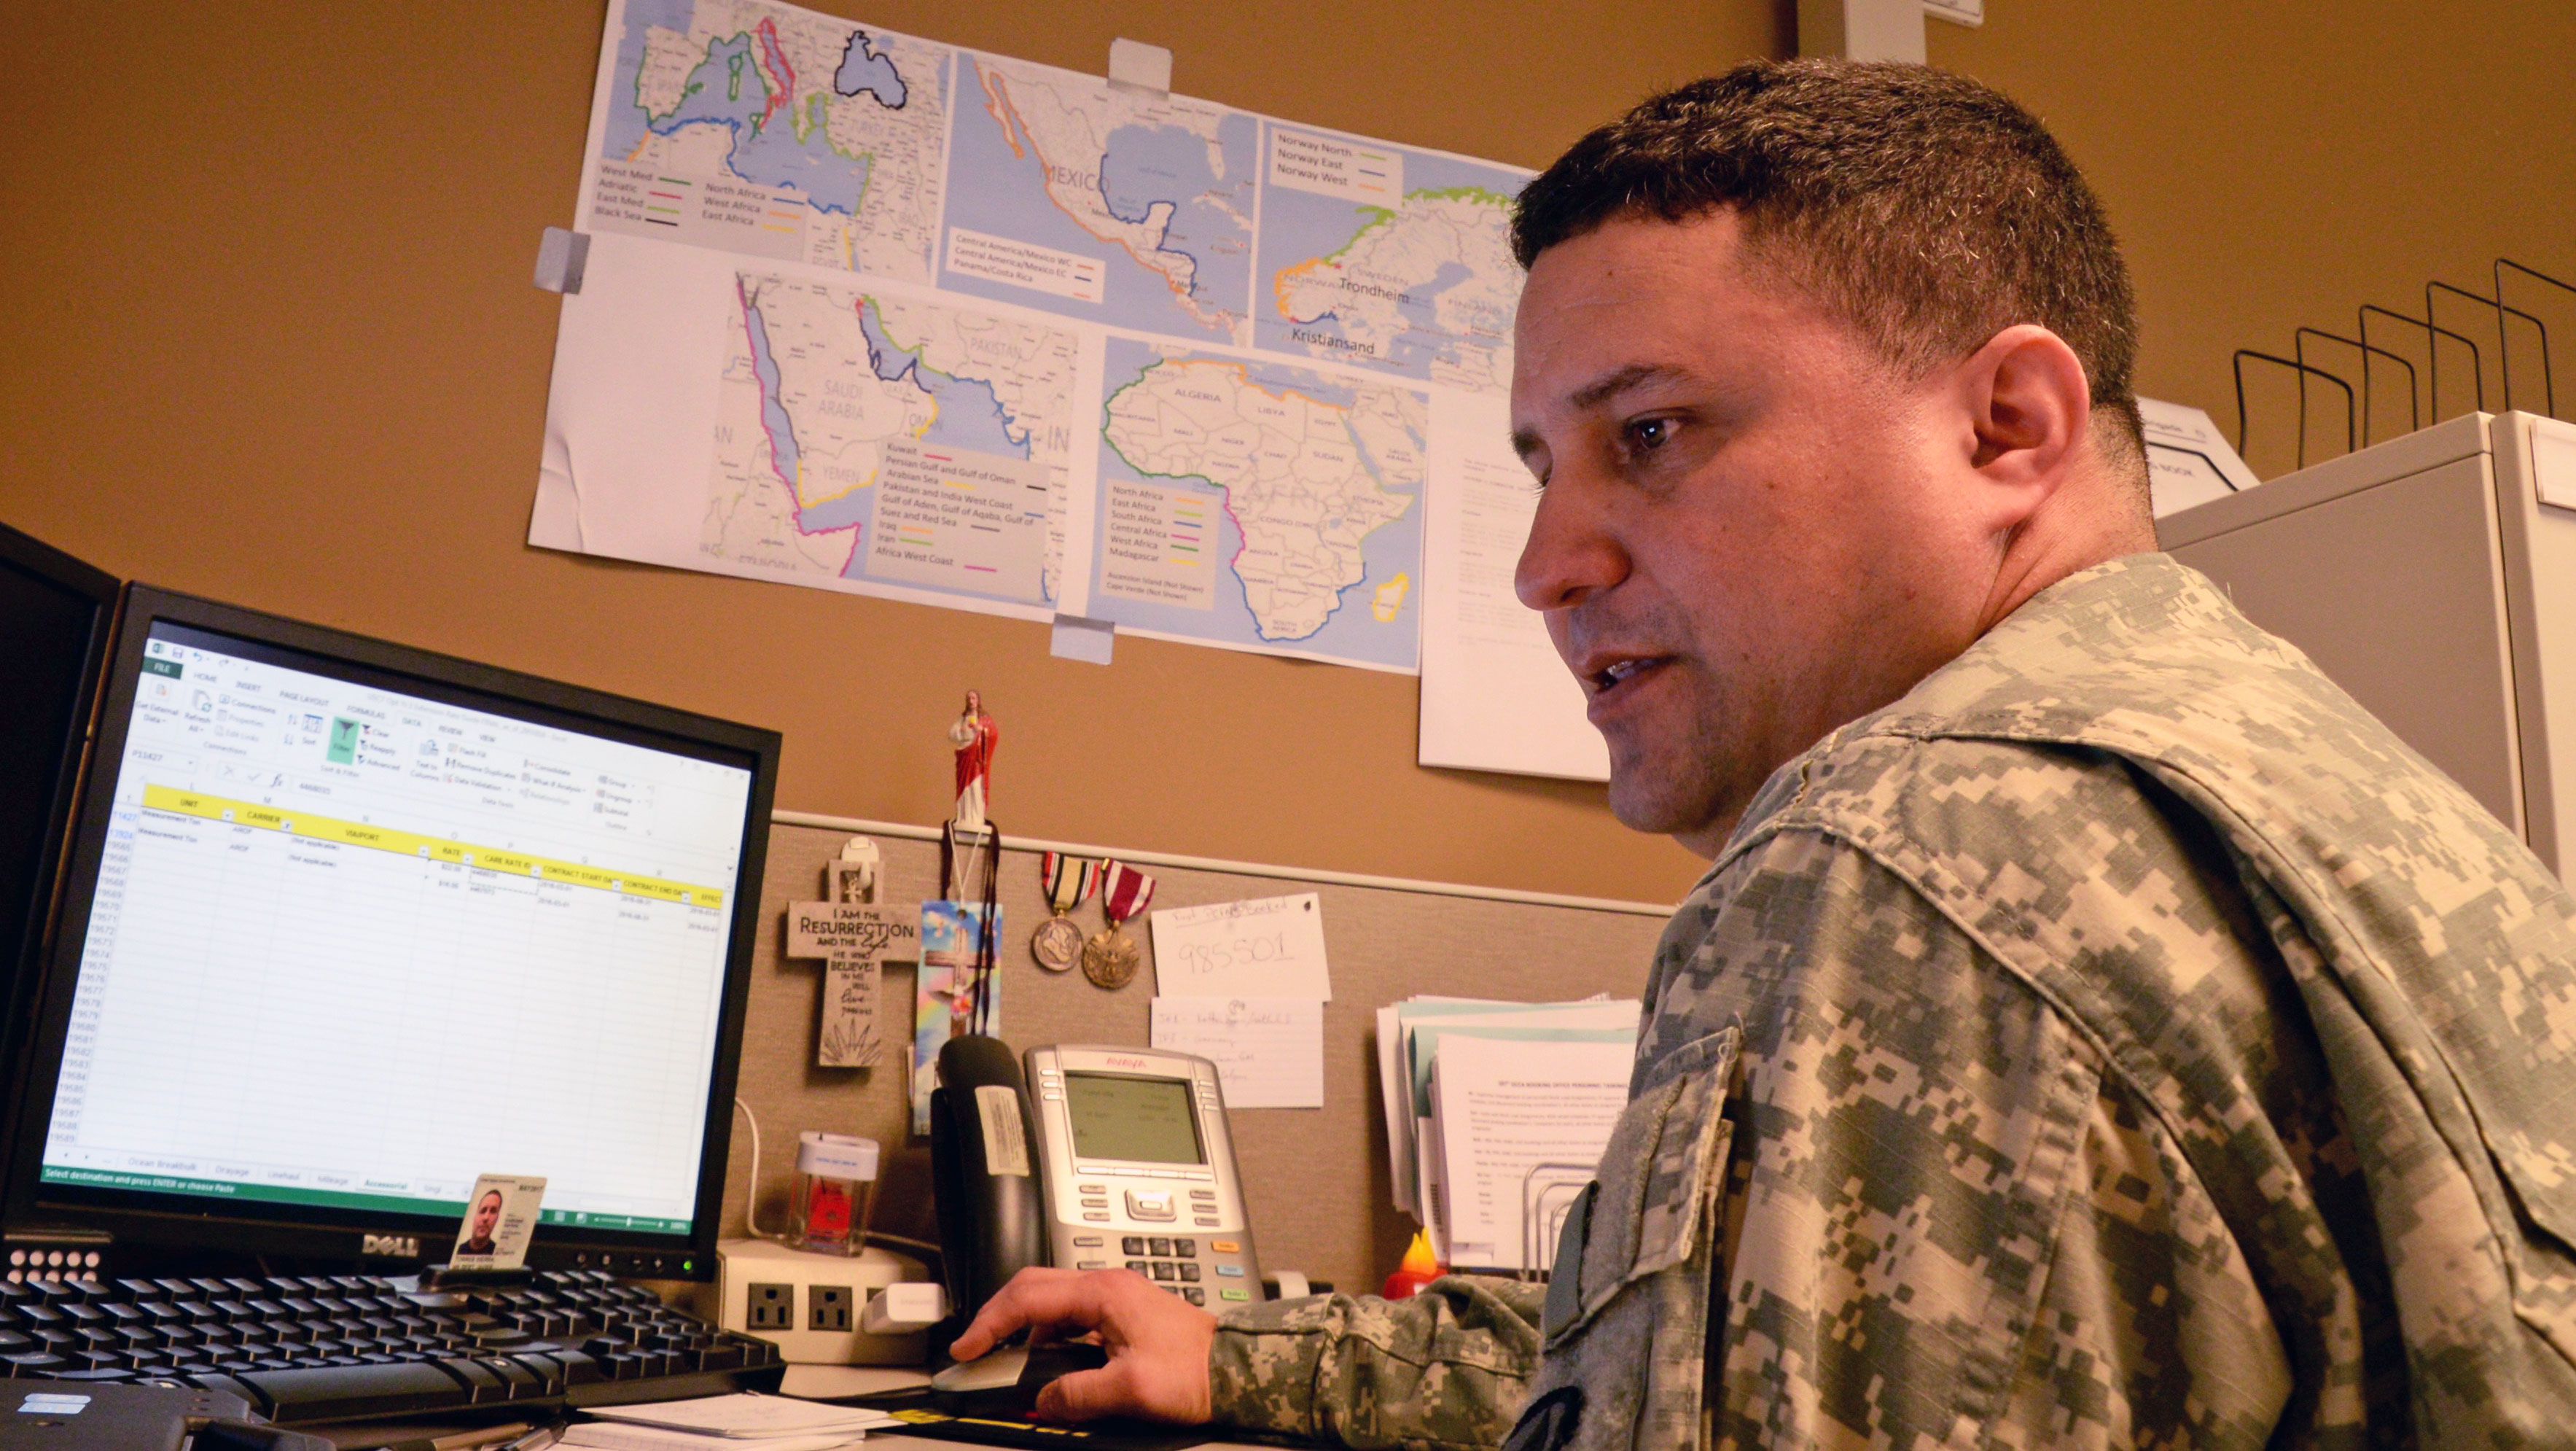 Sgt. 1st Class Wilbert J. Torressierra is serving his Army utilization assignment after spending a year working for Virginia International Terminals as part of the Training With Industry program.